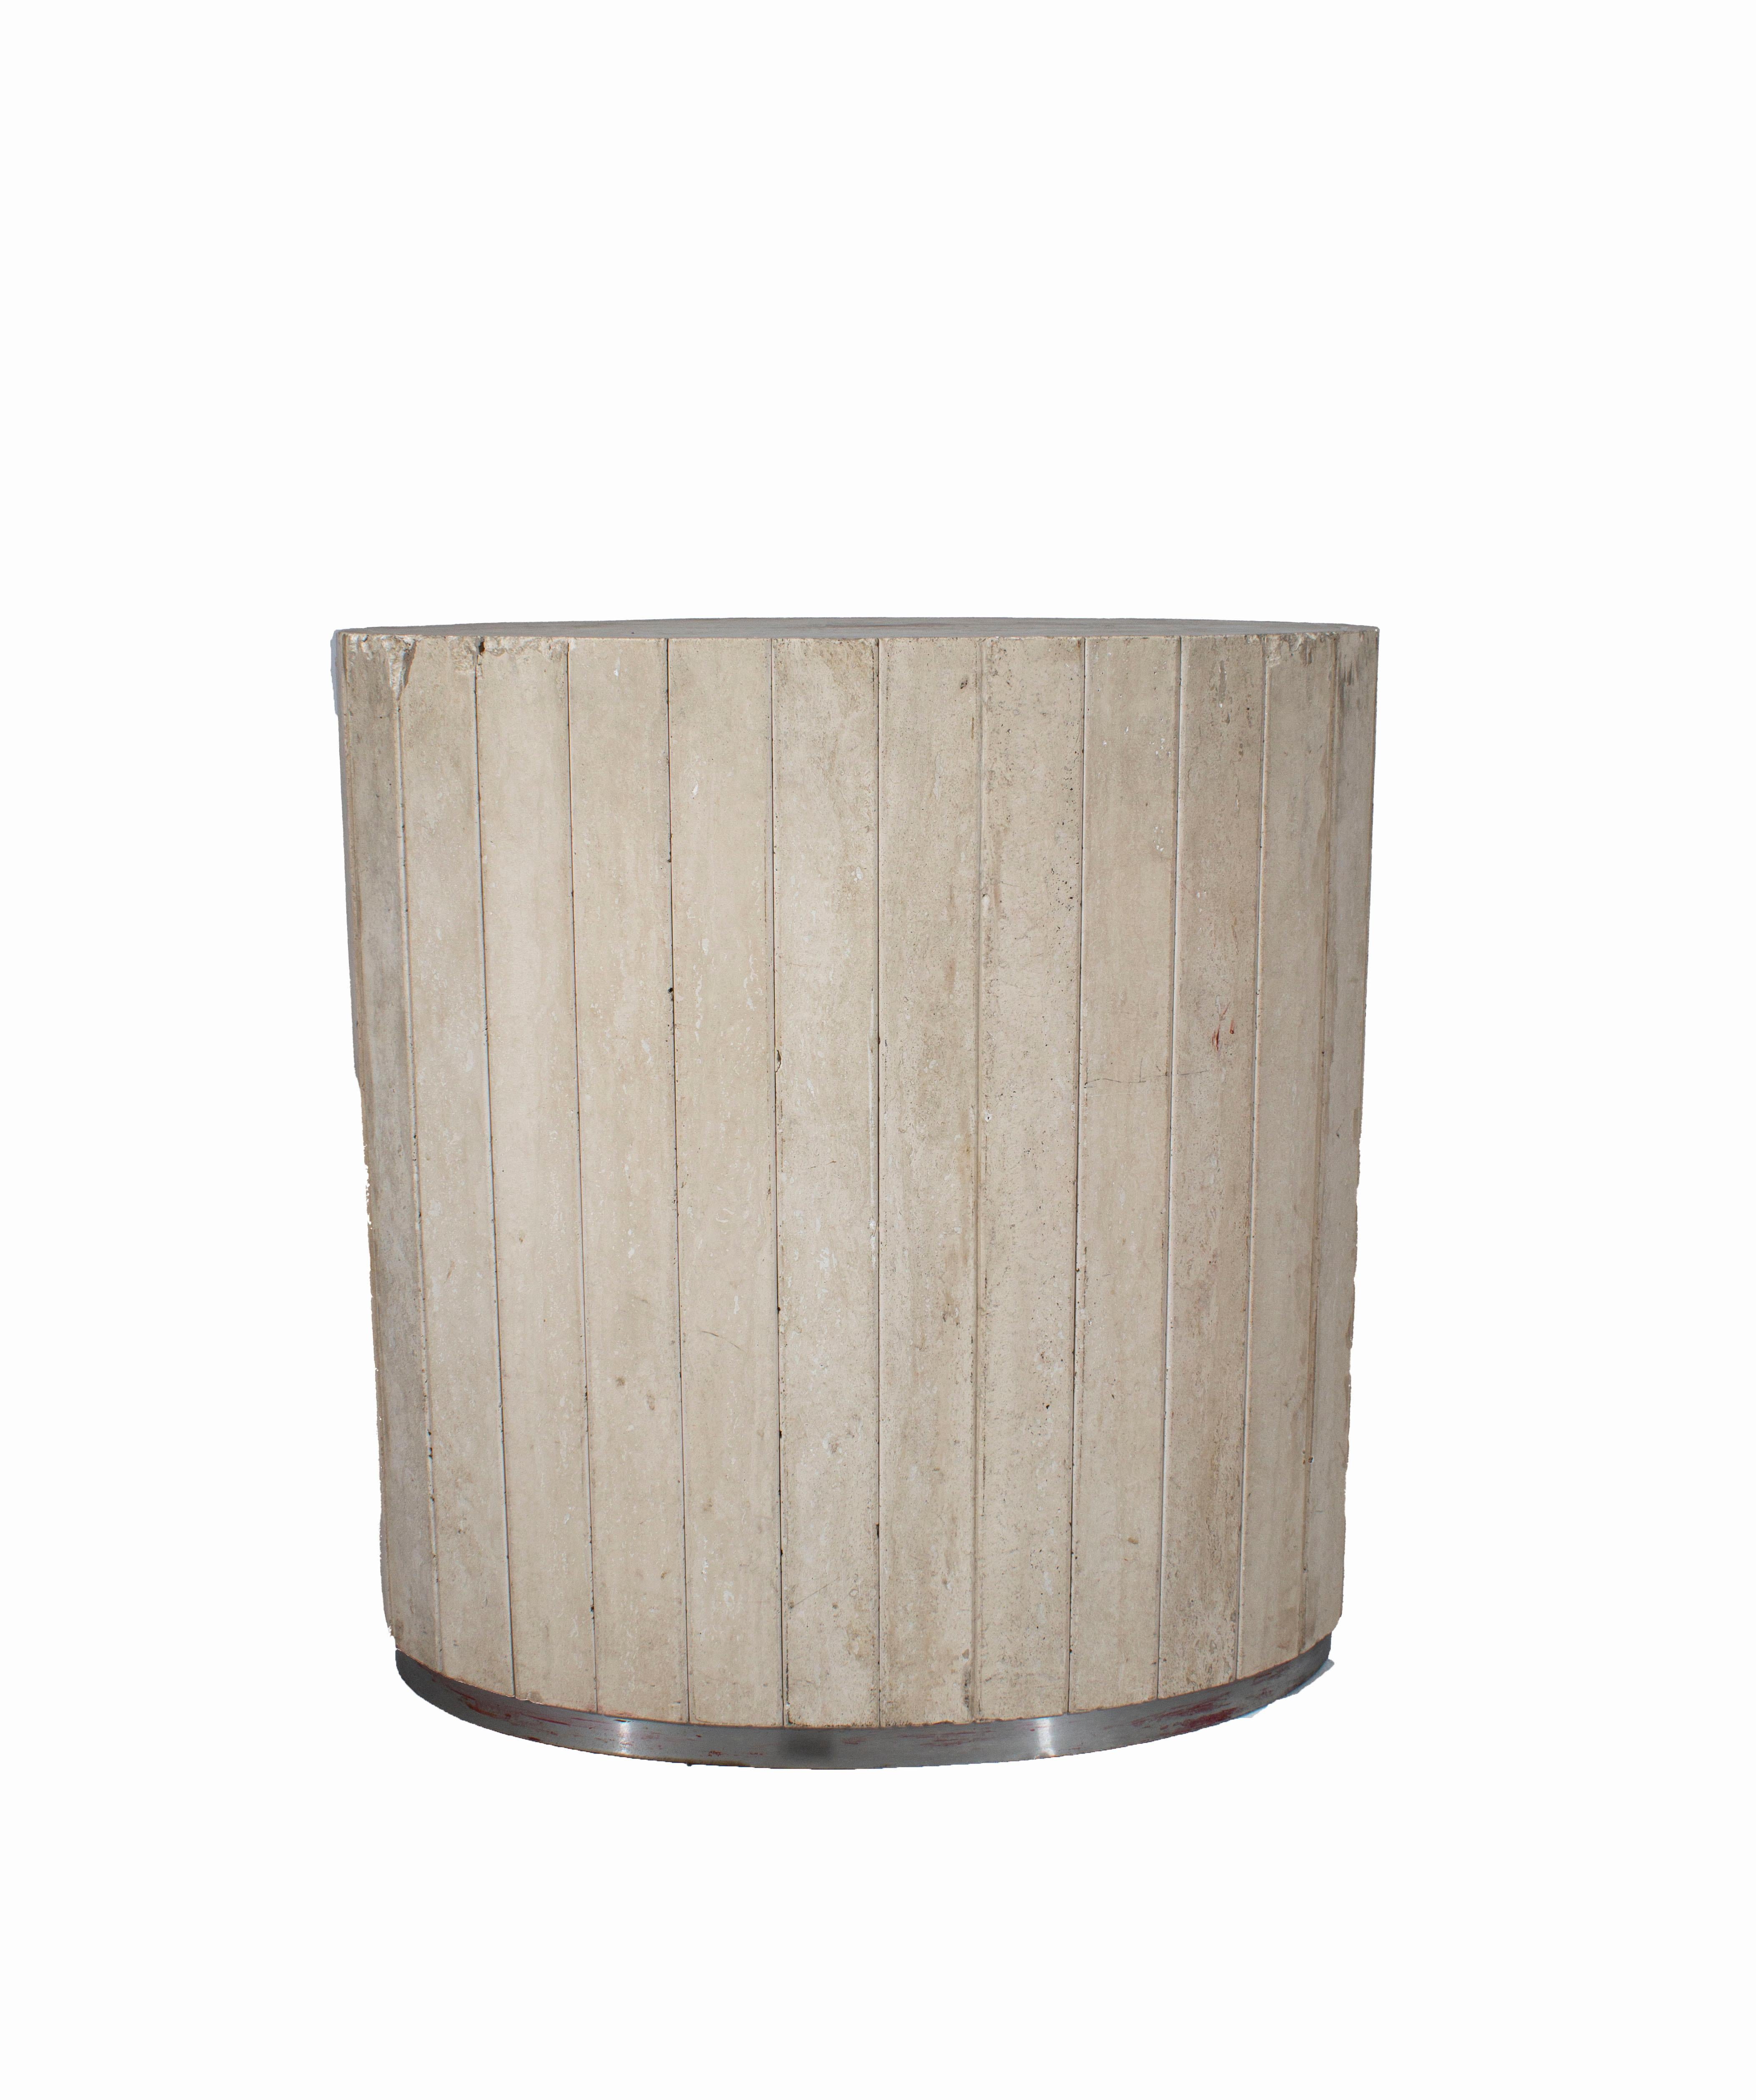 Concrete side table.

One of a kind item sourced by Brendan Bass for the Le Monde Collection.

Modernist style end table or side table.